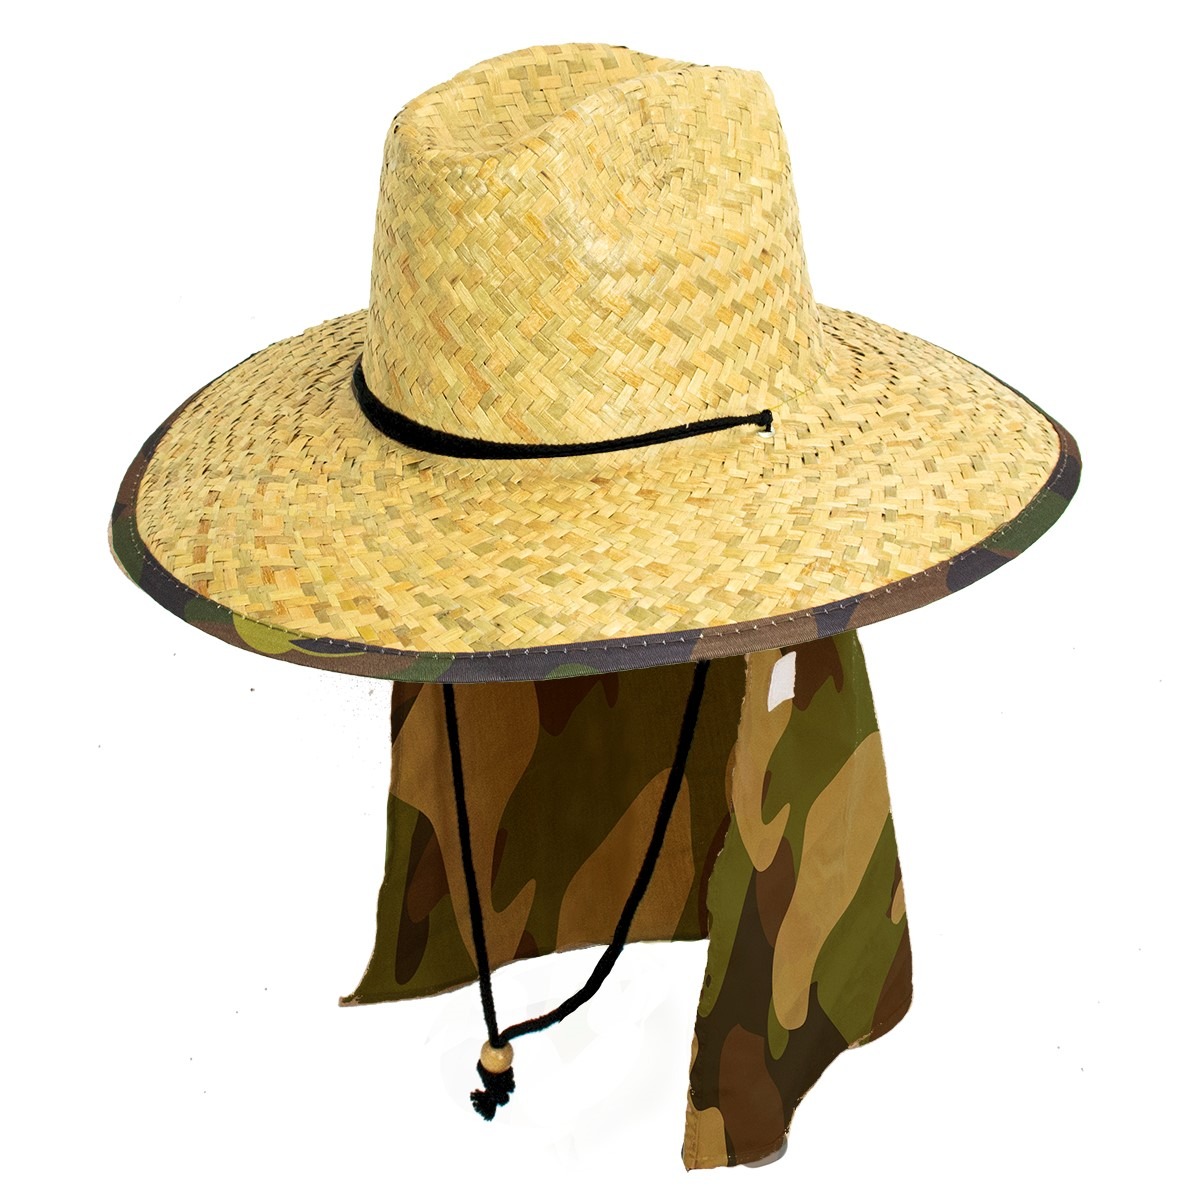 Straw Hats as low as $2.50 834